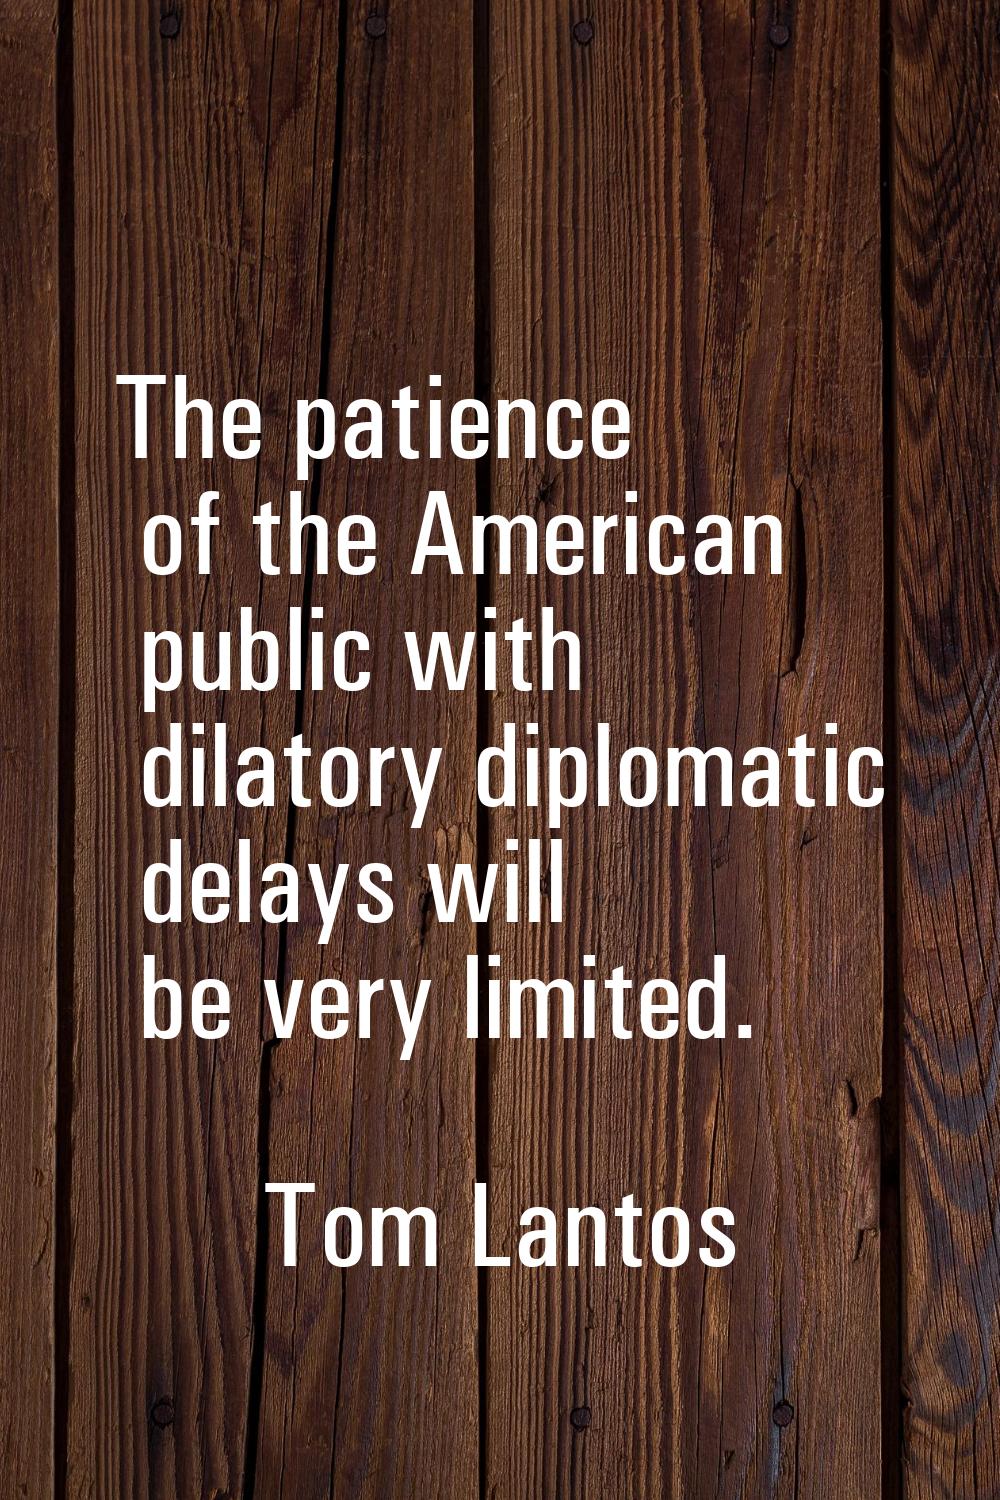 The patience of the American public with dilatory diplomatic delays will be very limited.